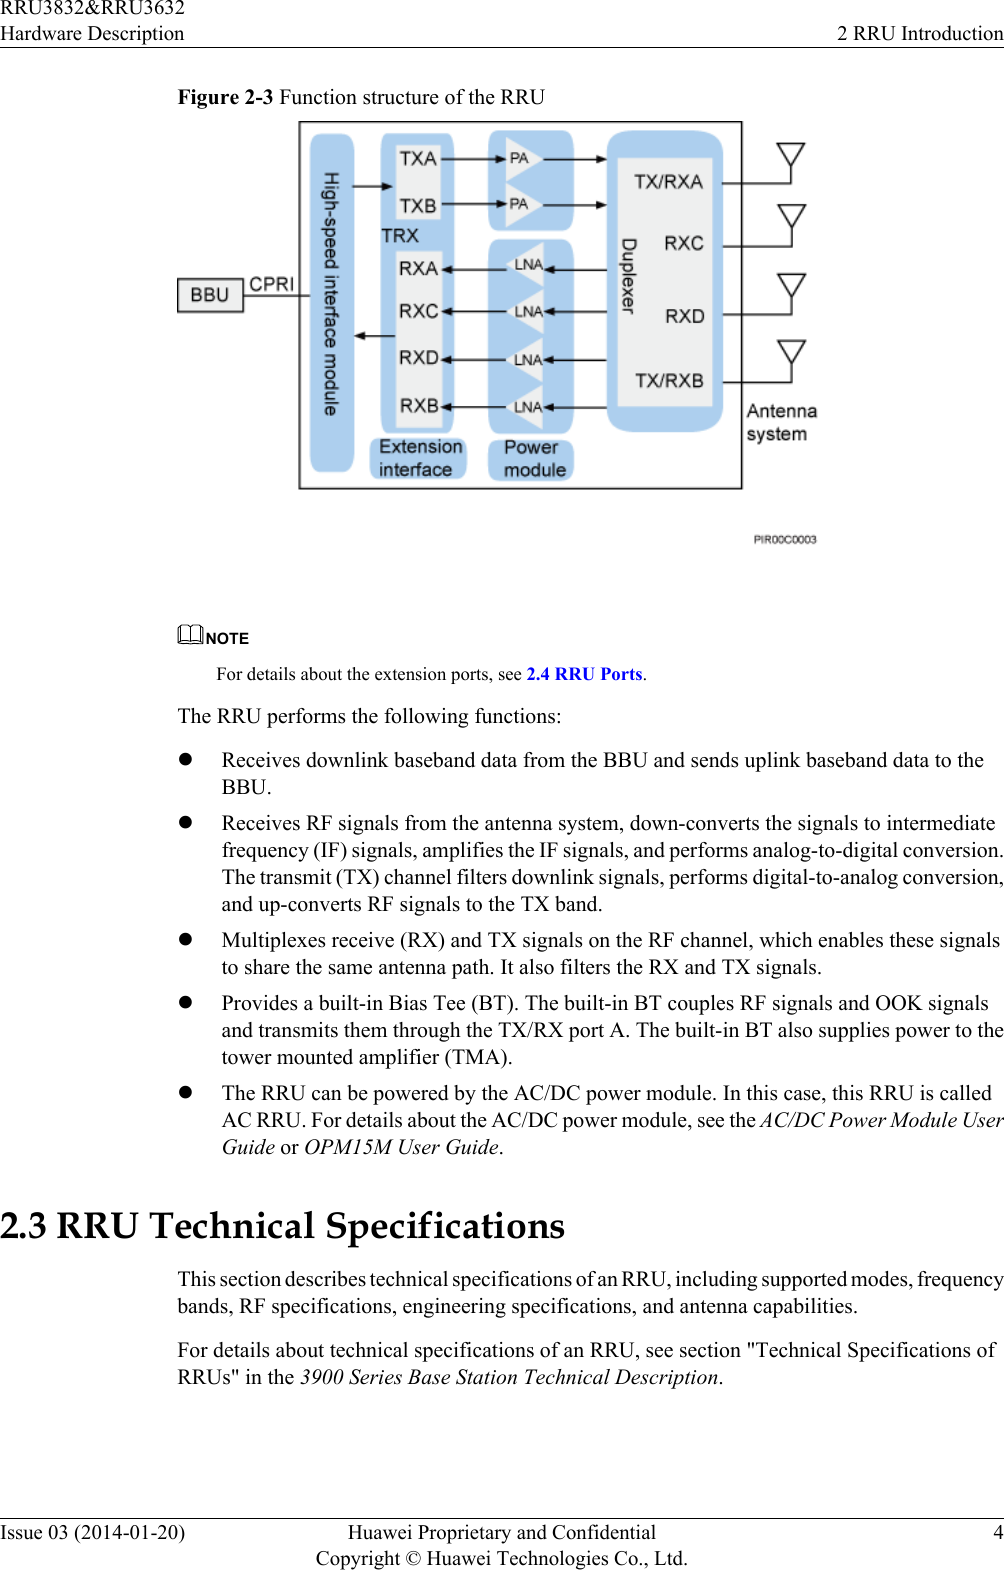 Figure 2-3 Function structure of the RRU NOTEFor details about the extension ports, see 2.4 RRU Ports.The RRU performs the following functions:lReceives downlink baseband data from the BBU and sends uplink baseband data to theBBU.lReceives RF signals from the antenna system, down-converts the signals to intermediatefrequency (IF) signals, amplifies the IF signals, and performs analog-to-digital conversion.The transmit (TX) channel filters downlink signals, performs digital-to-analog conversion,and up-converts RF signals to the TX band.lMultiplexes receive (RX) and TX signals on the RF channel, which enables these signalsto share the same antenna path. It also filters the RX and TX signals.lProvides a built-in Bias Tee (BT). The built-in BT couples RF signals and OOK signalsand transmits them through the TX/RX port A. The built-in BT also supplies power to thetower mounted amplifier (TMA).lThe RRU can be powered by the AC/DC power module. In this case, this RRU is calledAC RRU. For details about the AC/DC power module, see the AC/DC Power Module UserGuide or OPM15M User Guide.2.3 RRU Technical SpecificationsThis section describes technical specifications of an RRU, including supported modes, frequencybands, RF specifications, engineering specifications, and antenna capabilities.For details about technical specifications of an RRU, see section &quot;Technical Specifications ofRRUs&quot; in the 3900 Series Base Station Technical Description.RRU3832&amp;RRU3632Hardware Description 2 RRU IntroductionIssue 03 (2014-01-20) Huawei Proprietary and ConfidentialCopyright © Huawei Technologies Co., Ltd.4